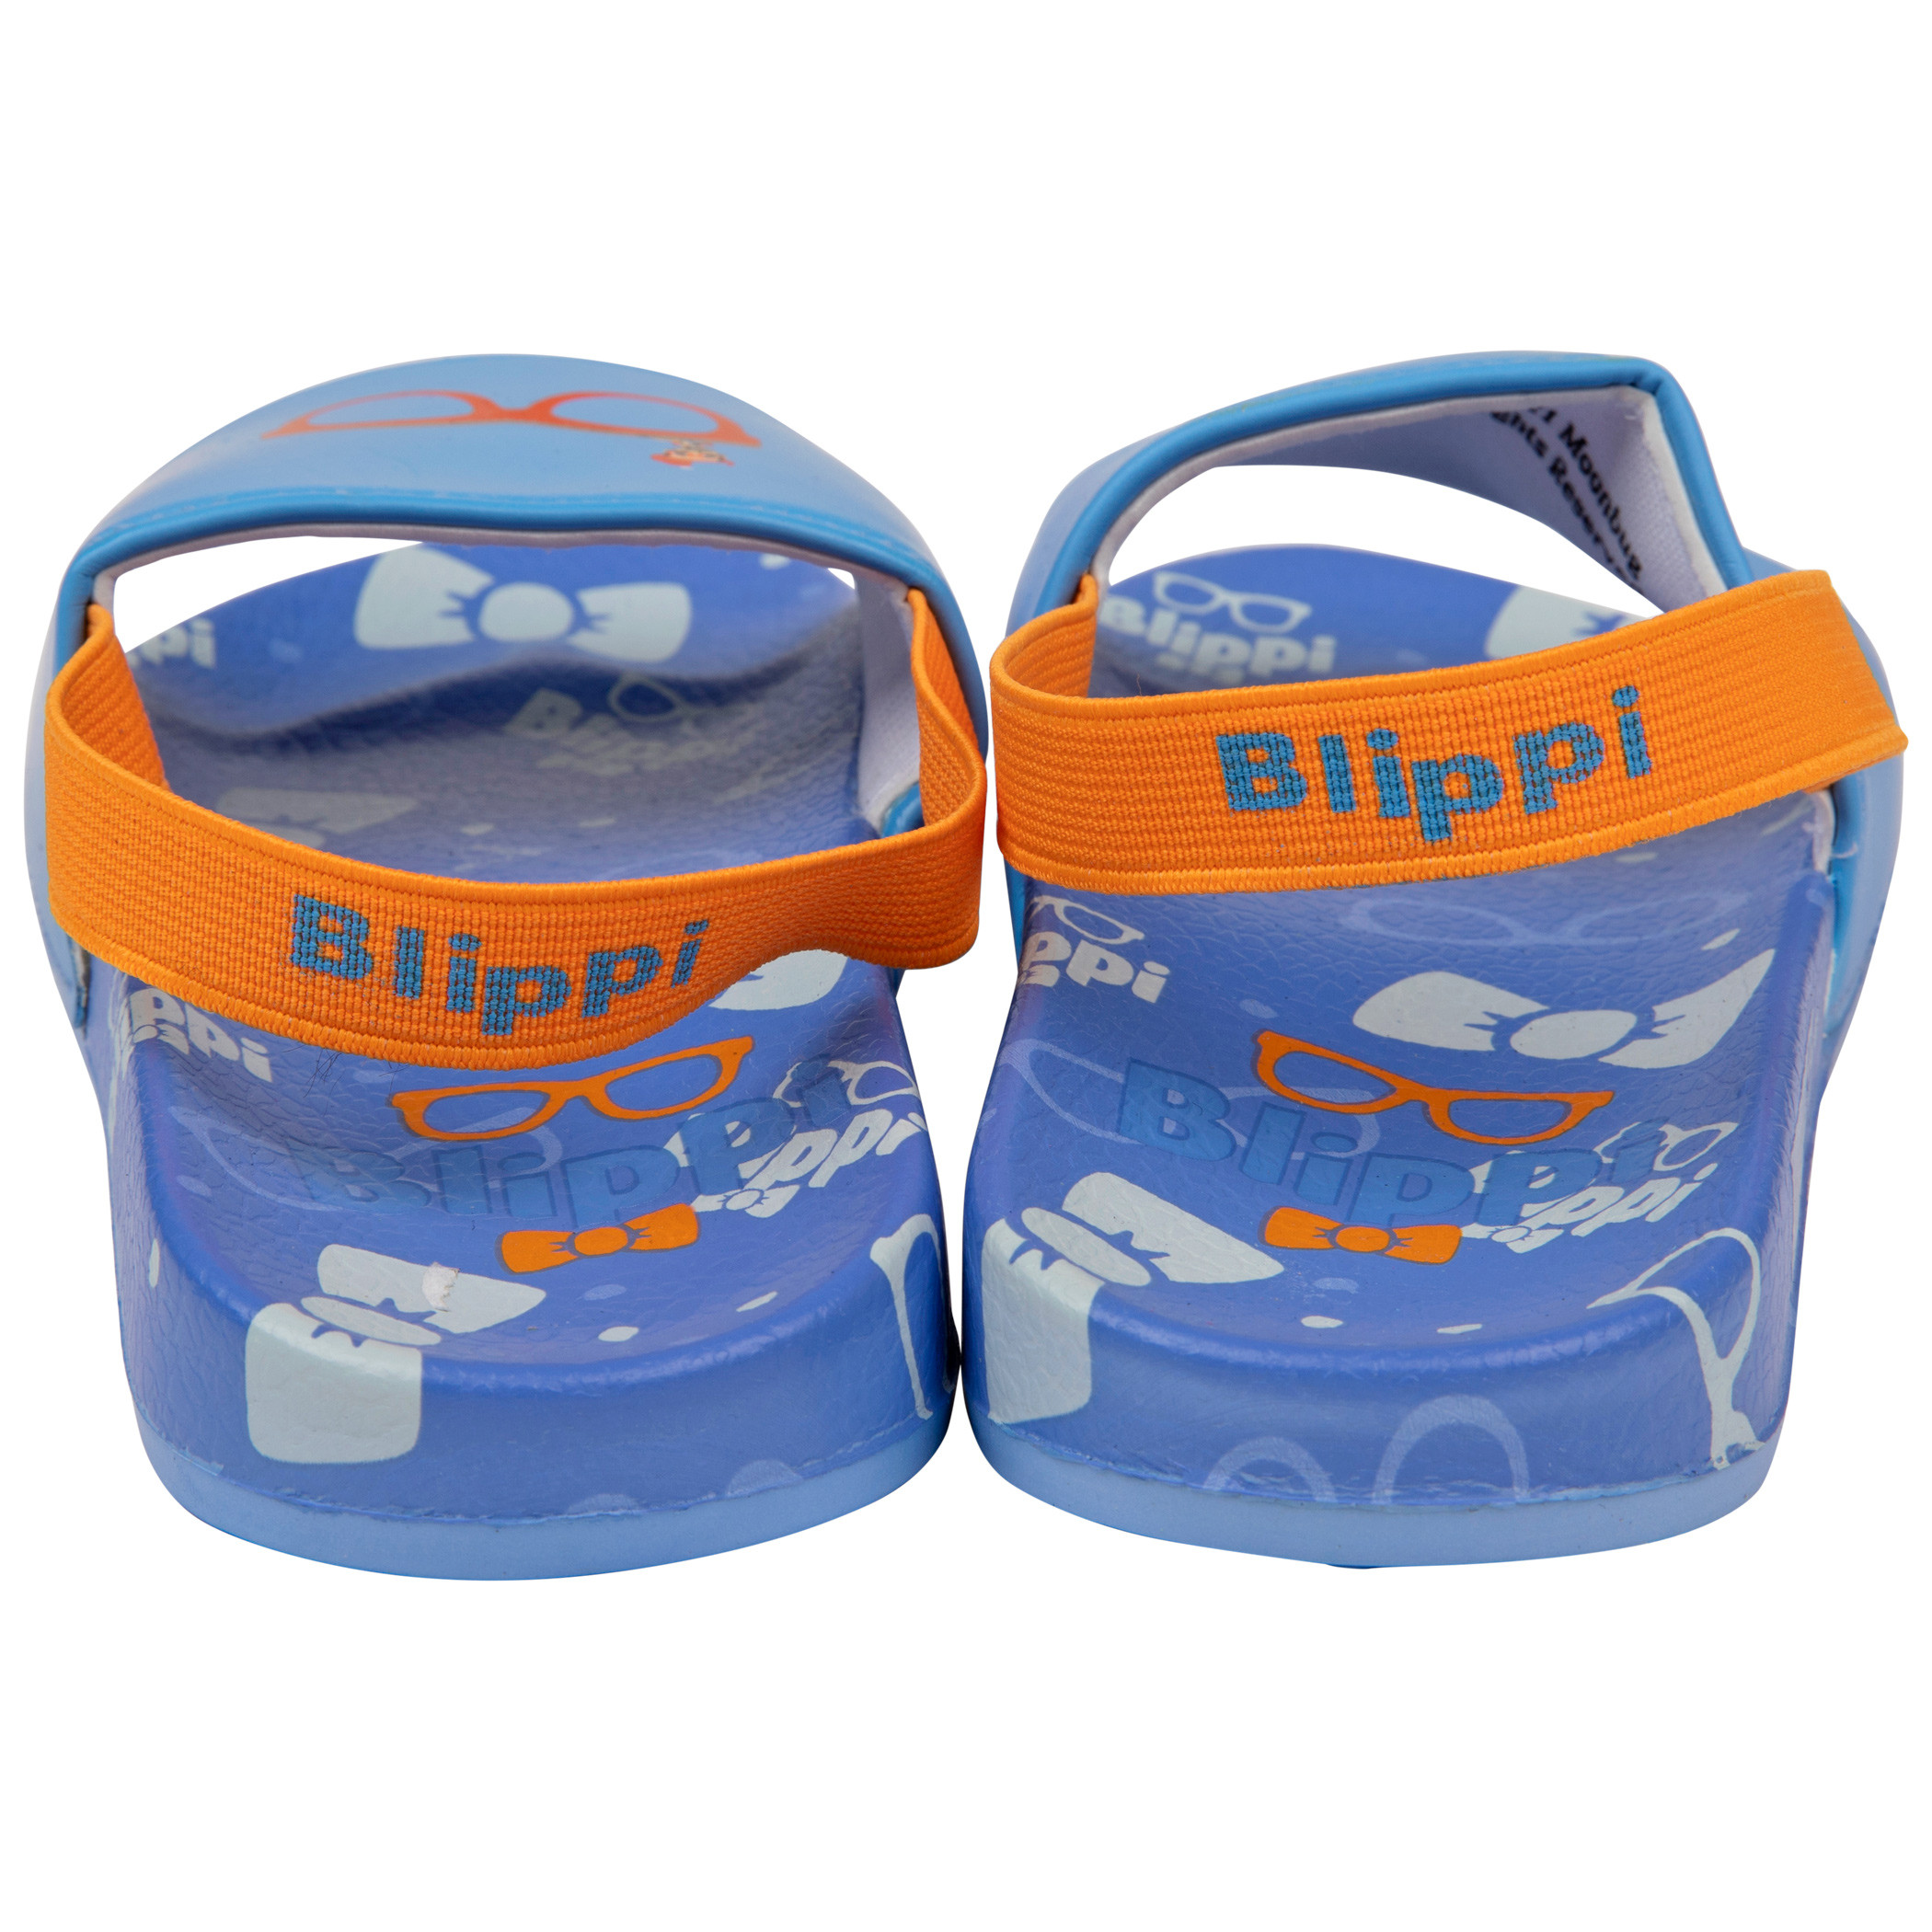 Blippi Character and Glasses Toddlers Sandals